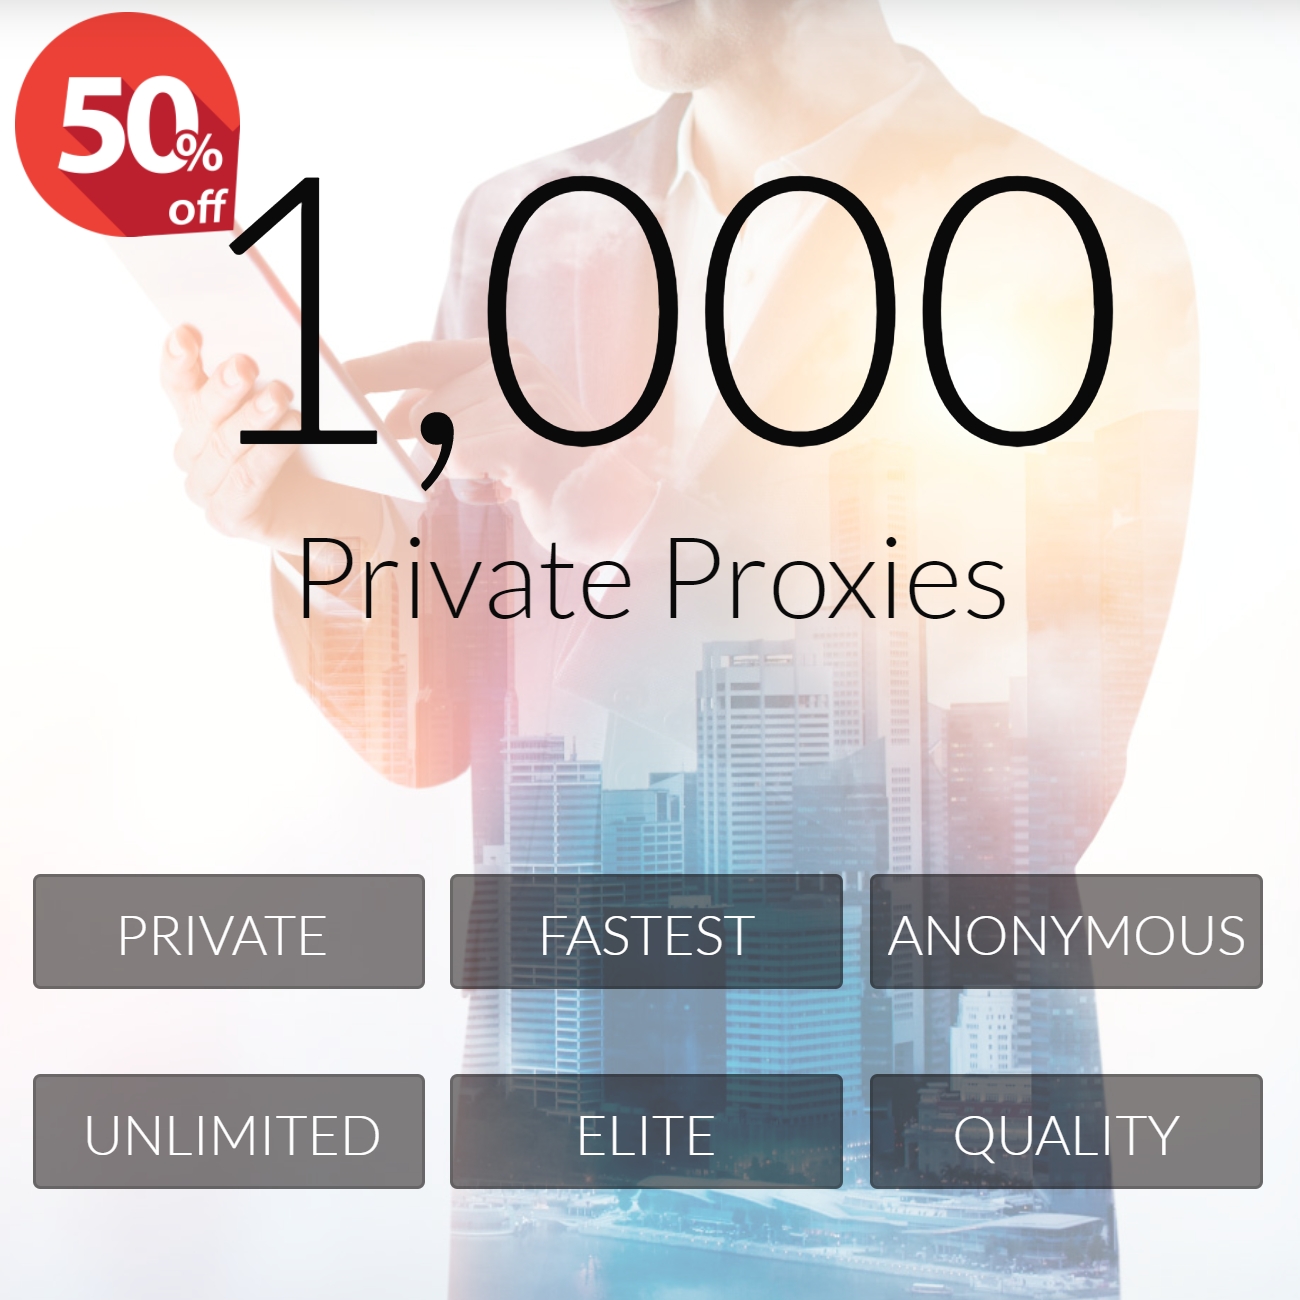 extraproxies 1000 private proxies